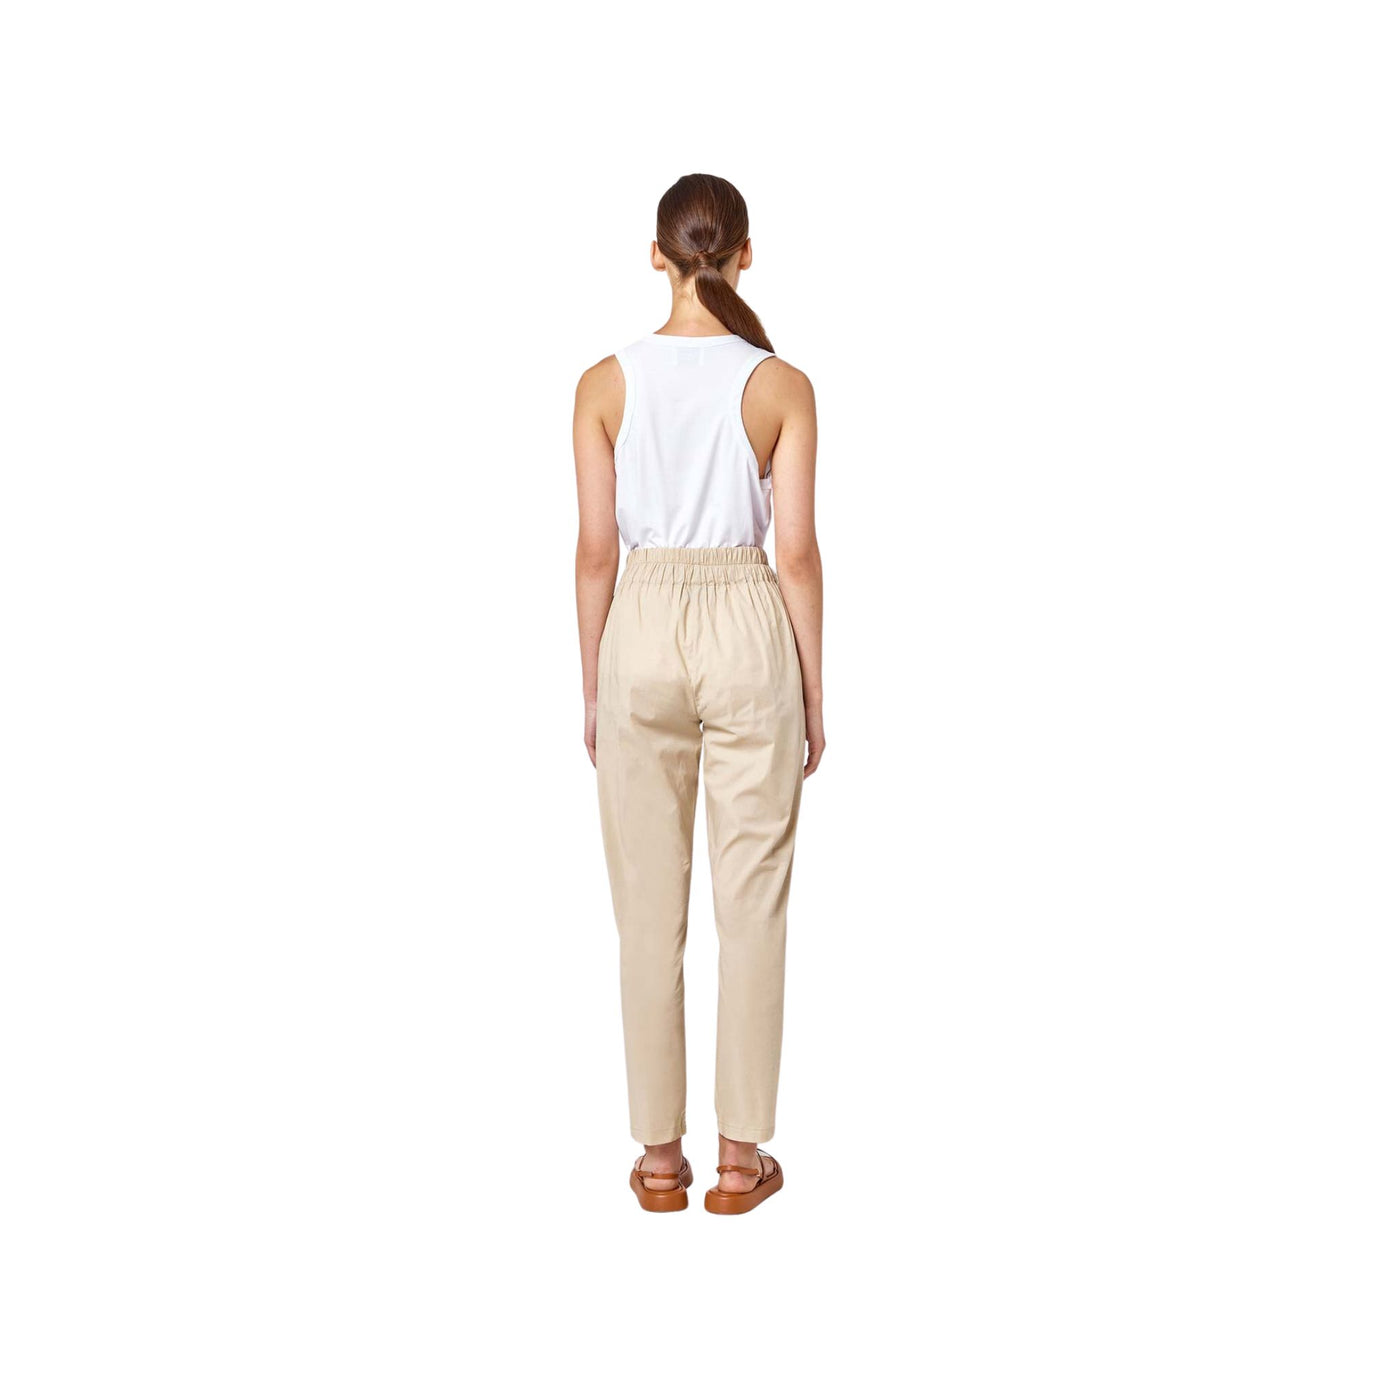 Women's trousers with drawstring waist